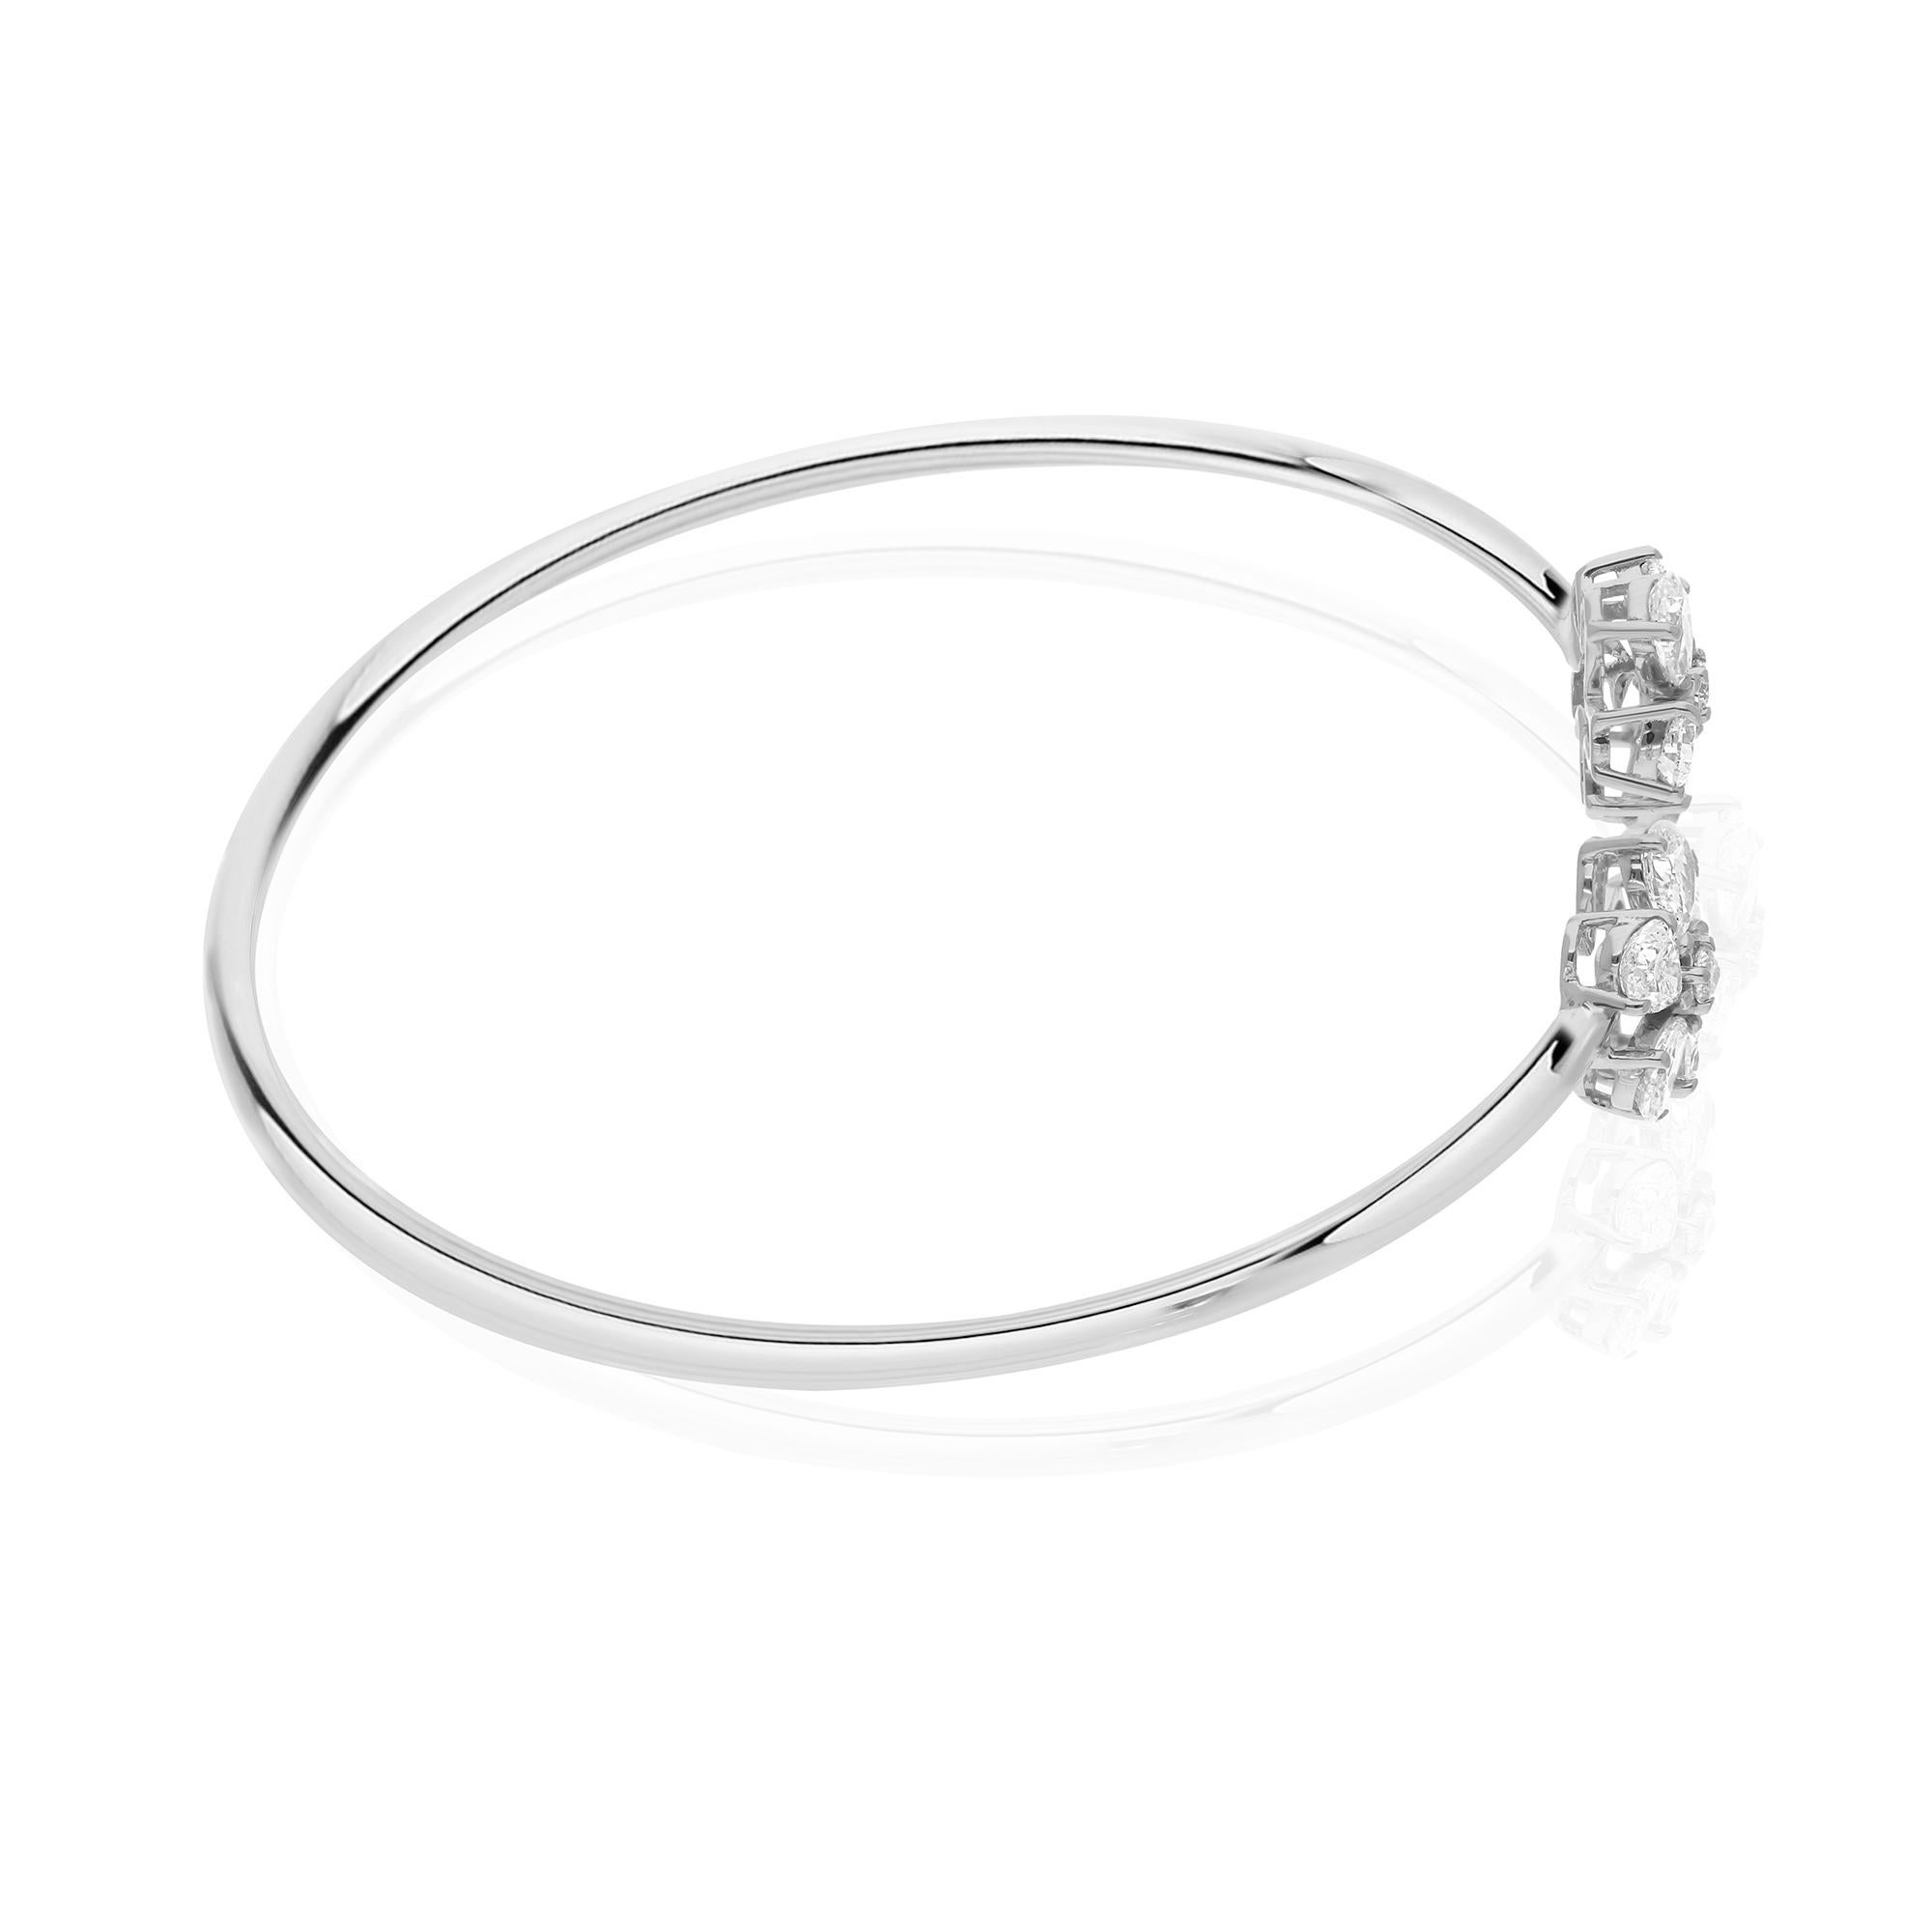 Step into a world of natural beauty and refined elegance with this captivating Natural 1.36 Carat Round Diamond Flower Cuff Bangle Bracelet, delicately crafted in luxurious 18 karat white gold. This exquisite piece of jewelry celebrates the timeless